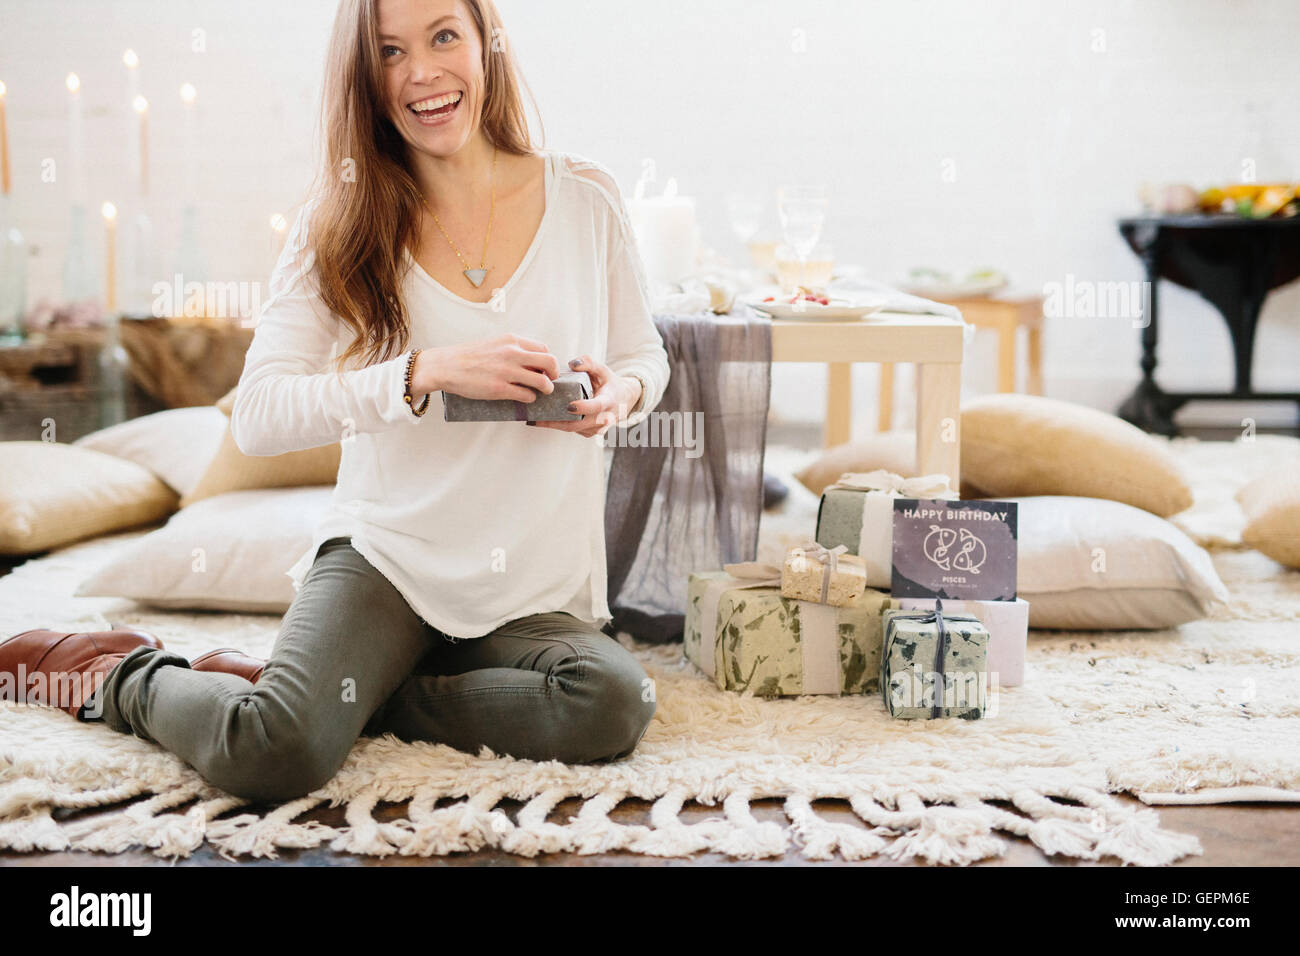 A woman sitting on the ground holding a gift wrapped present. Stock Photo